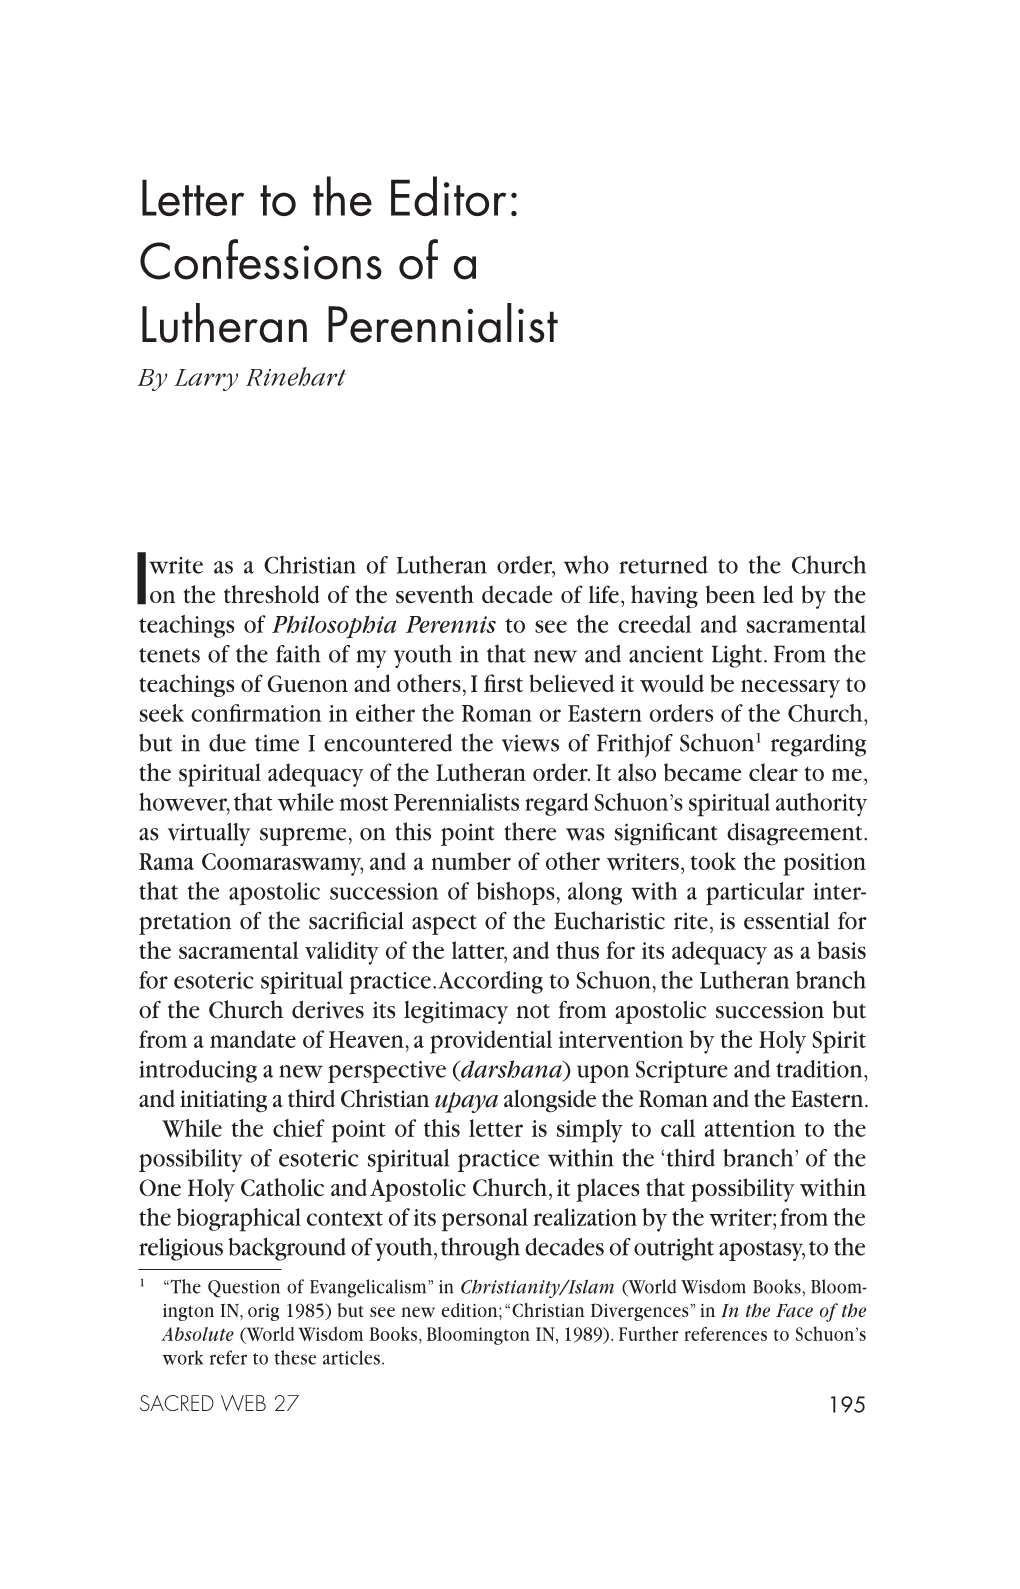 Confessions of a Lutheran Perennialist by Larry Rinehart